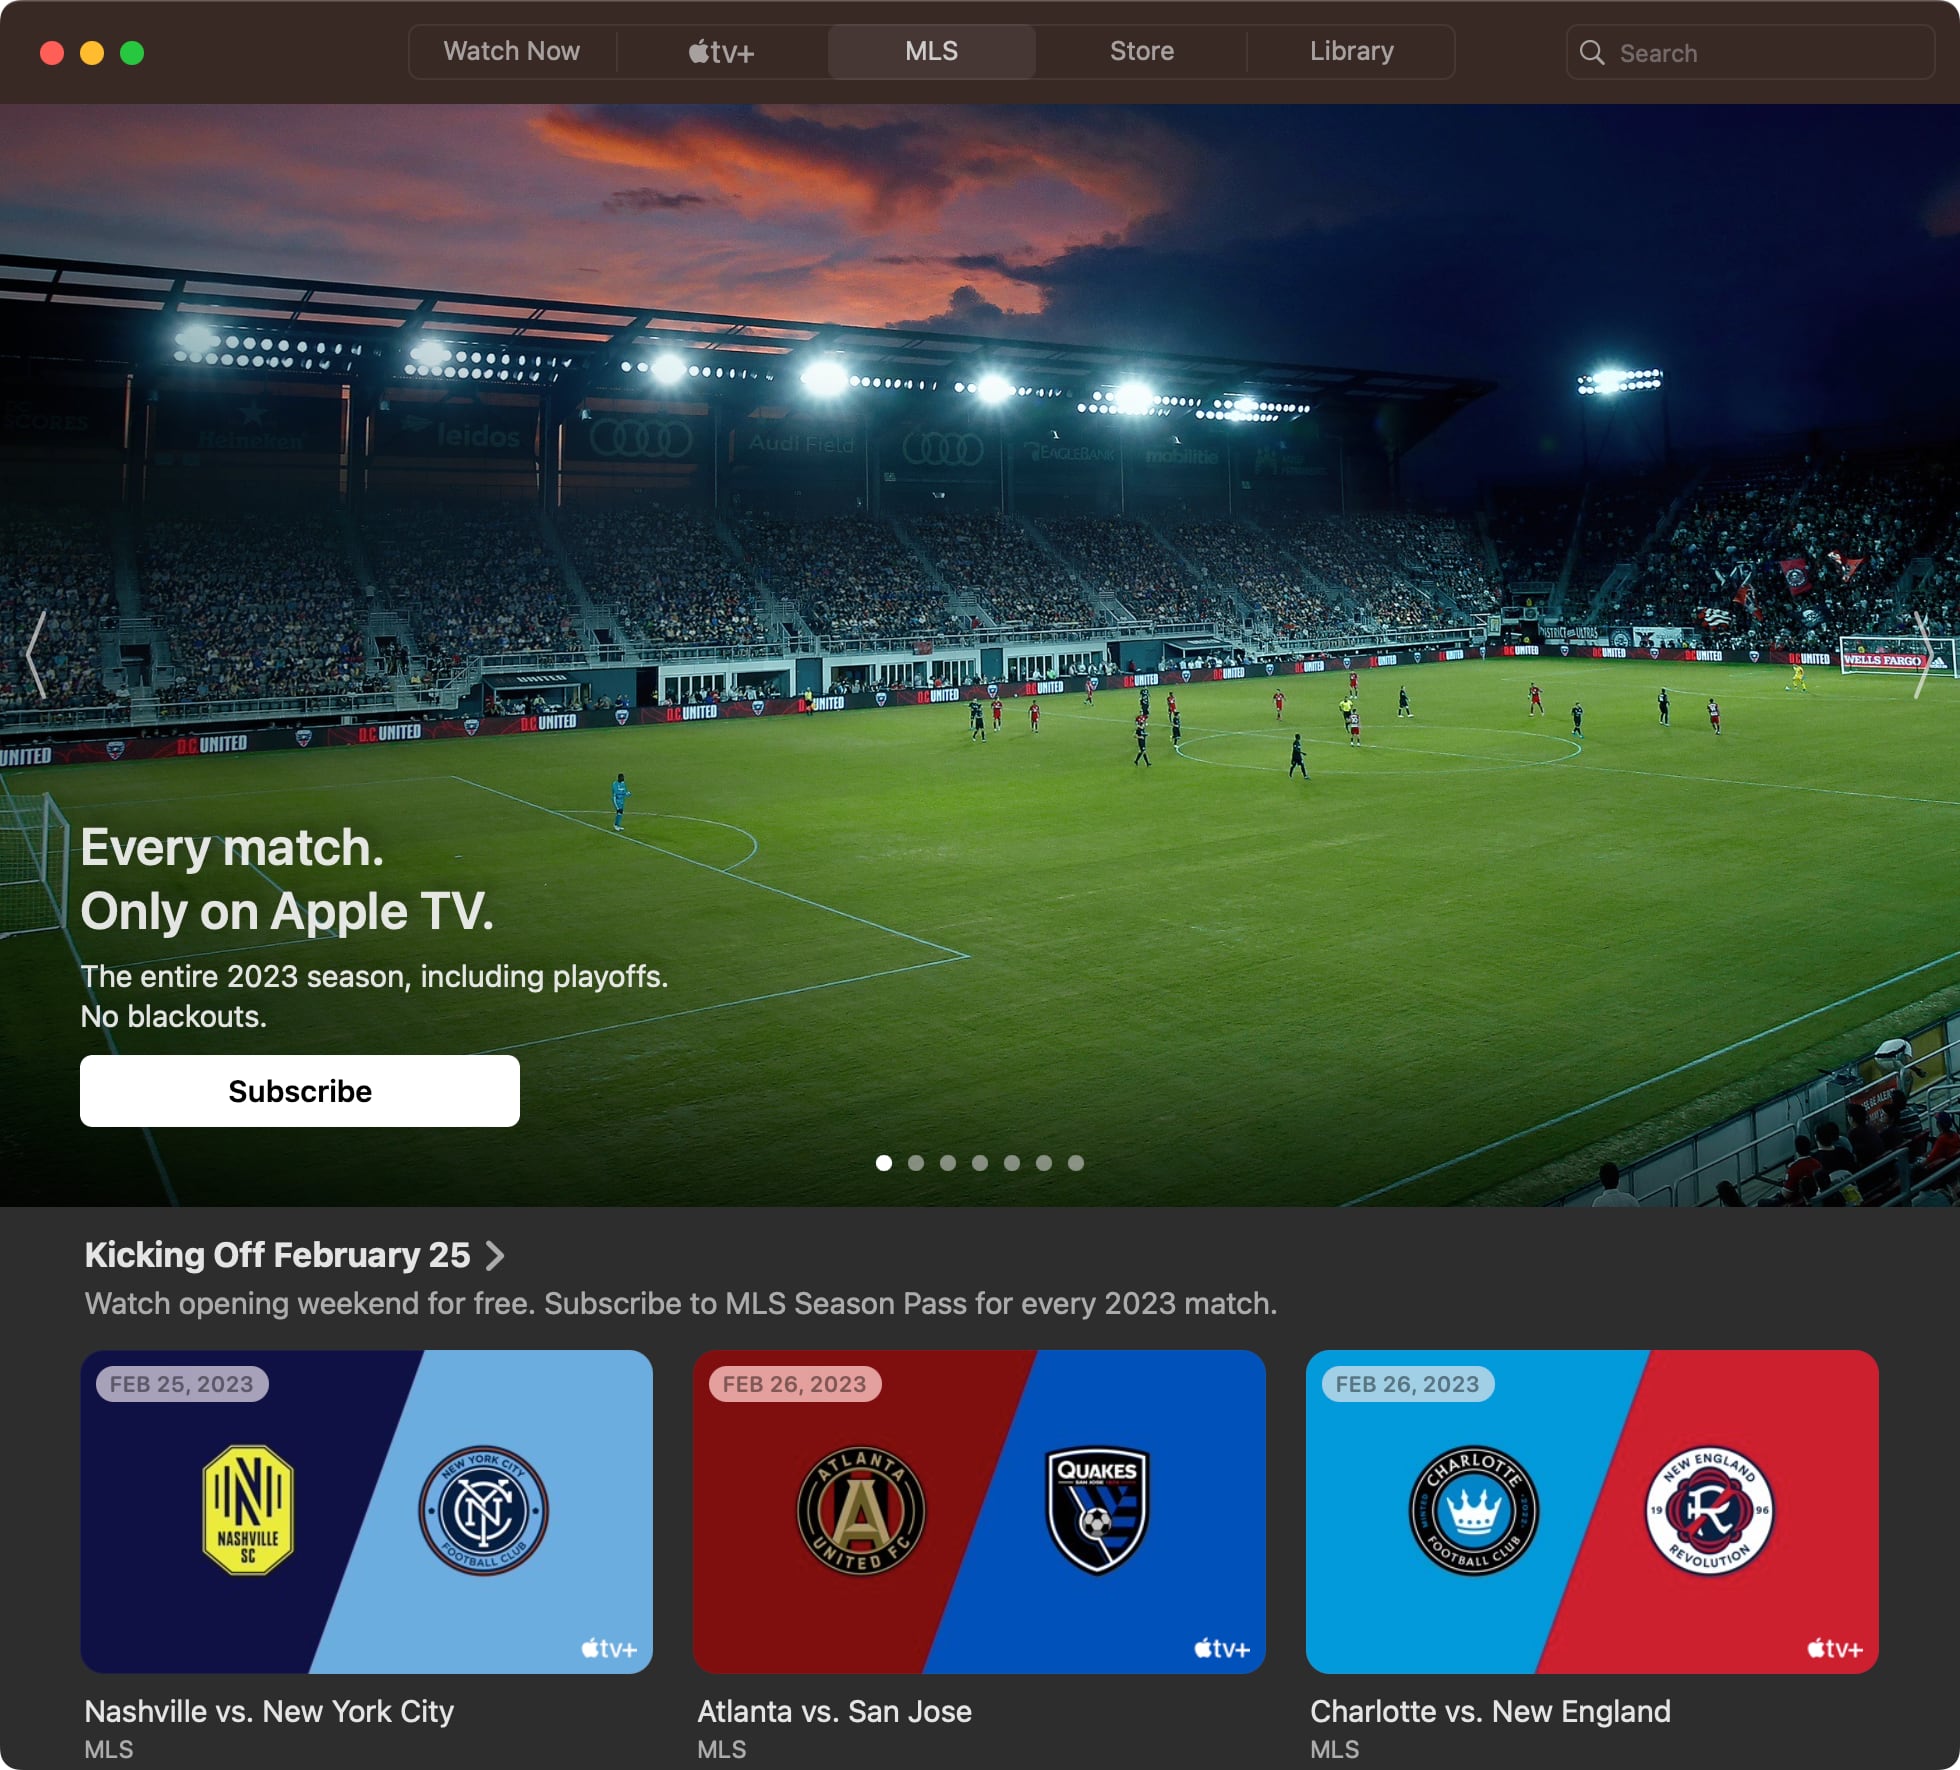 How to subscribe to MLS Season Pass through Apple’s TV app